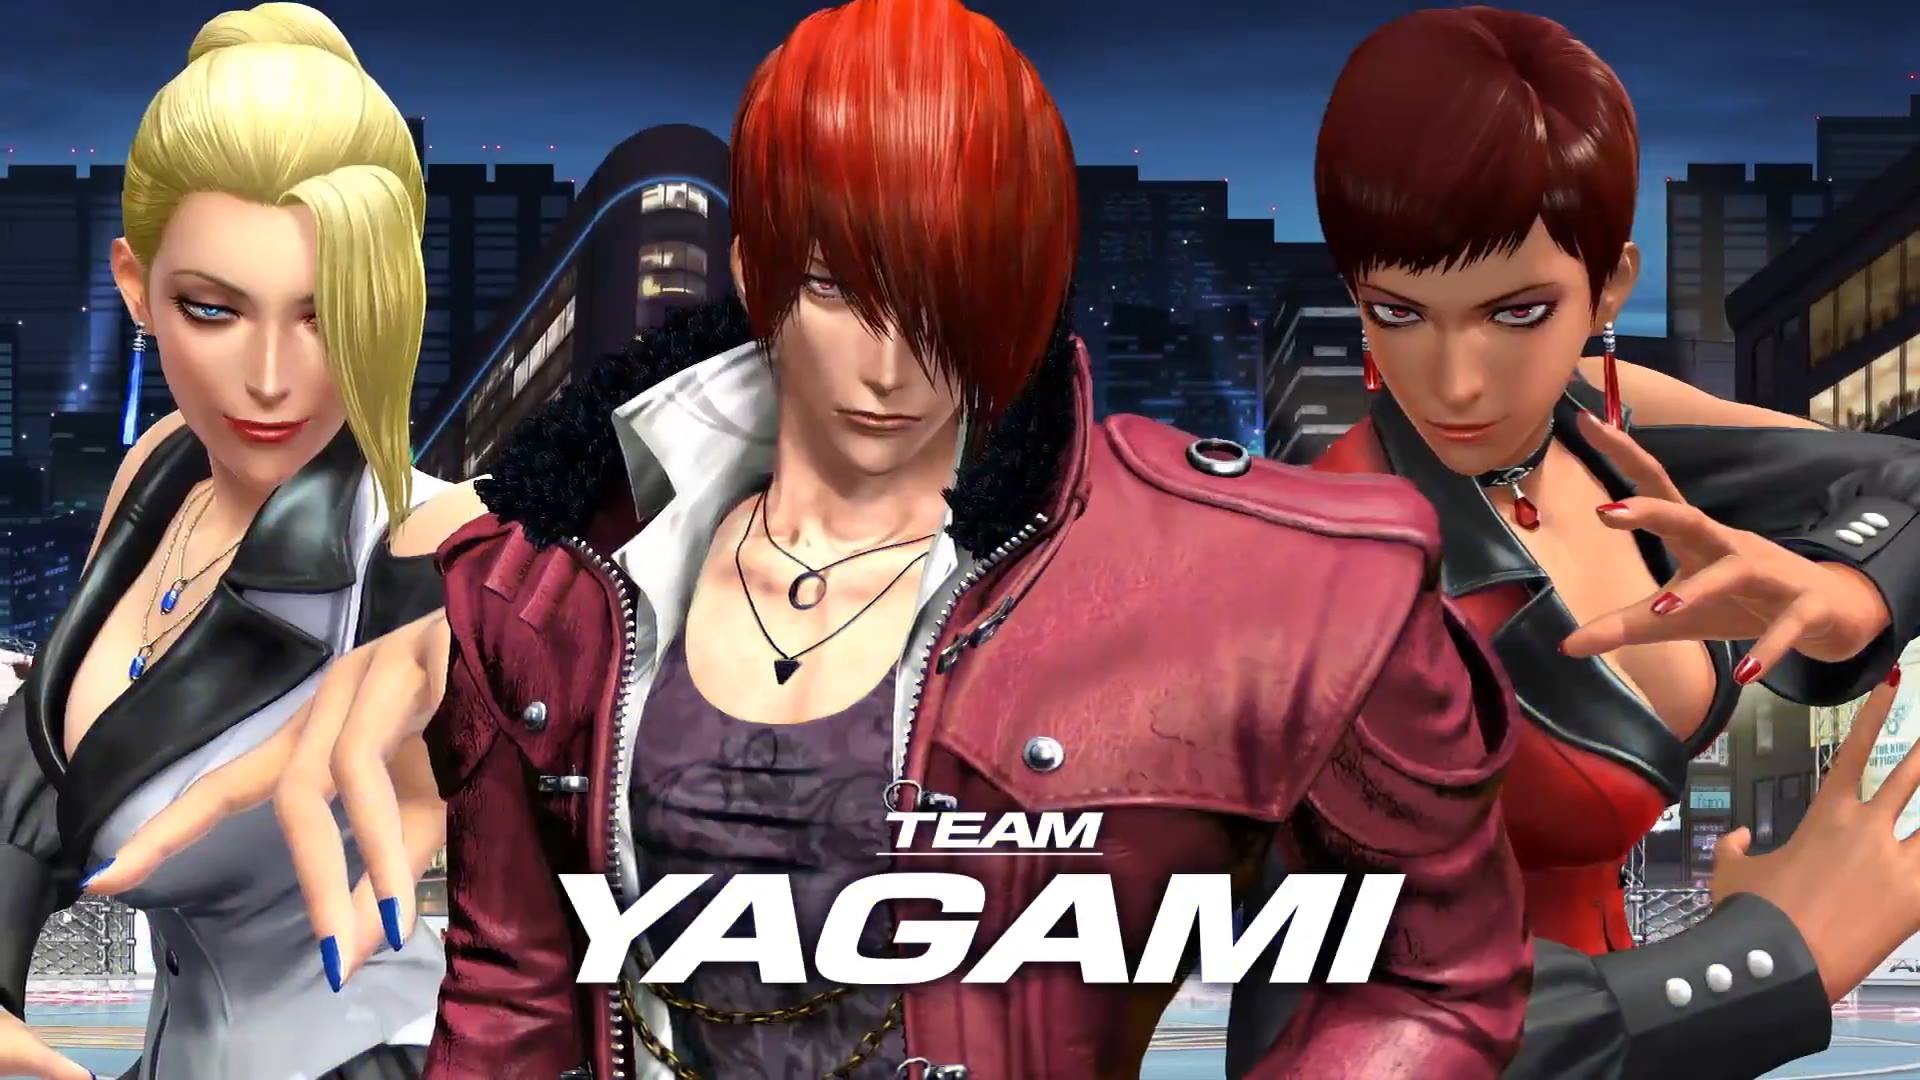 Iori Yagami wallpapers, Posted by Ryan Simpson, Gaming backgrounds, High-resolution images, 1920x1080 Full HD Desktop